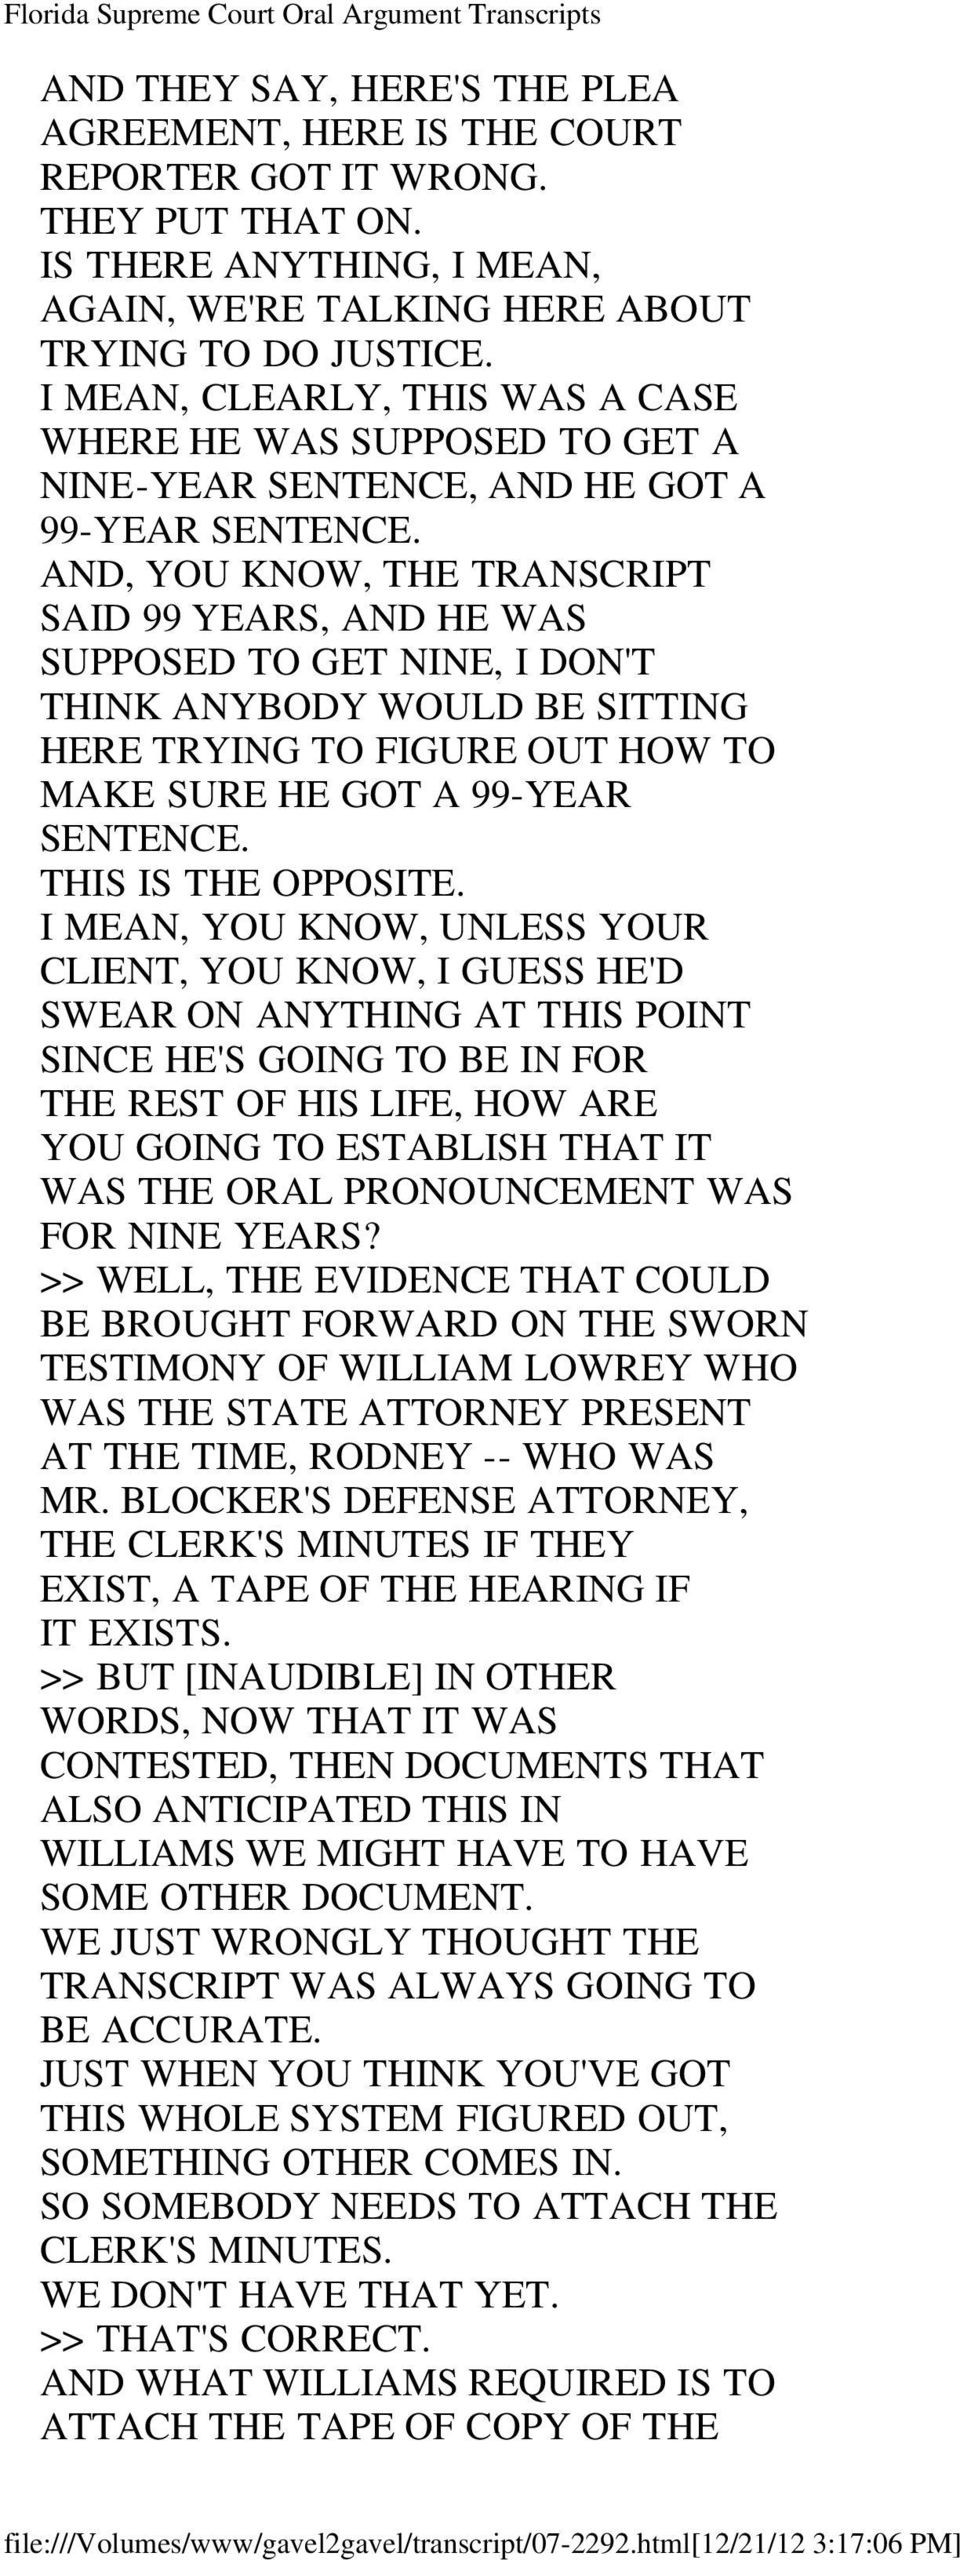 AND, YOU KNOW, THE TRANSCRIPT SAID 99 YEARS, AND HE WAS SUPPOSED TO GET NINE, I DON'T THINK ANYBODY WOULD BE SITTING HERE TRYING TO FIGURE OUT HOW TO MAKE SURE HE GOT A 99-YEAR SENTENCE.